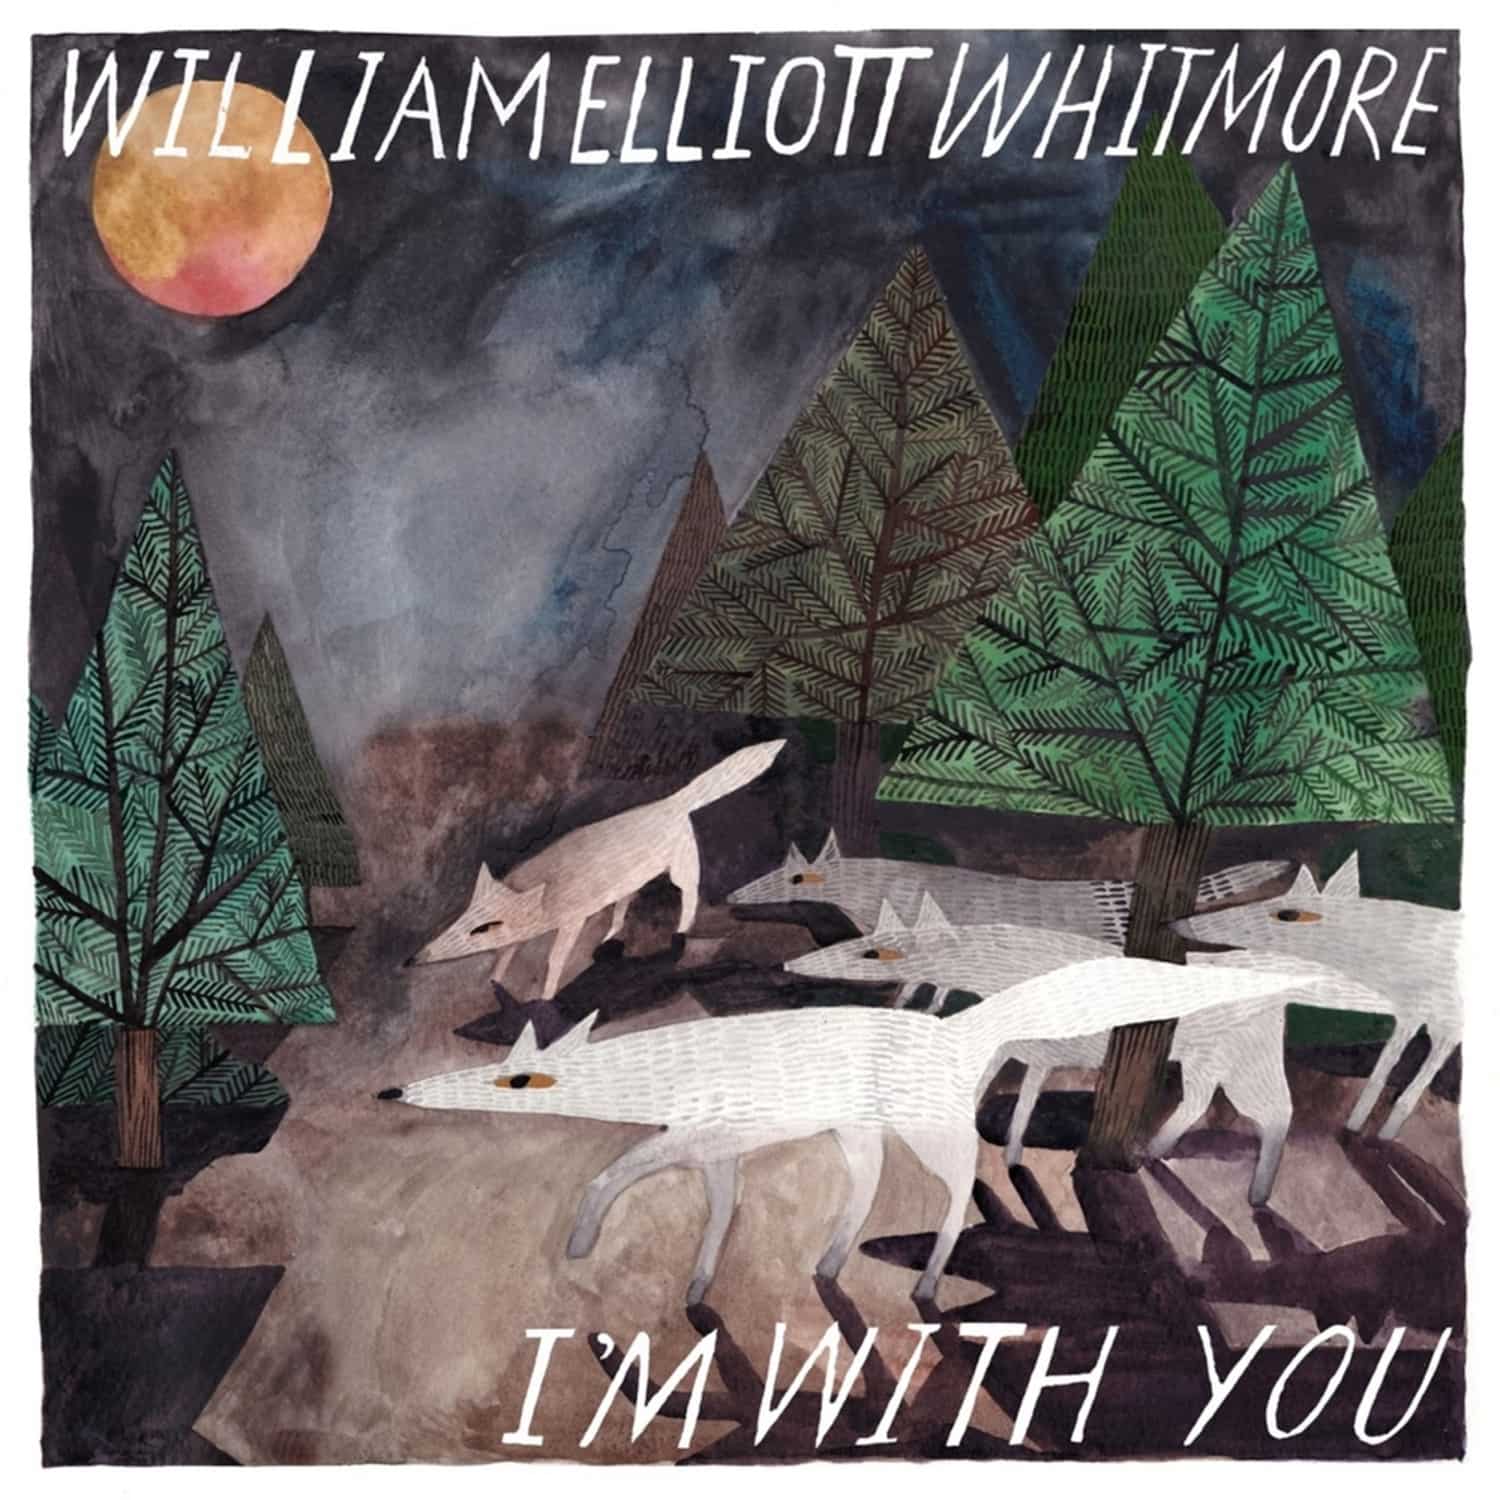 William Elliot Whitmore - I M WITH YOU 